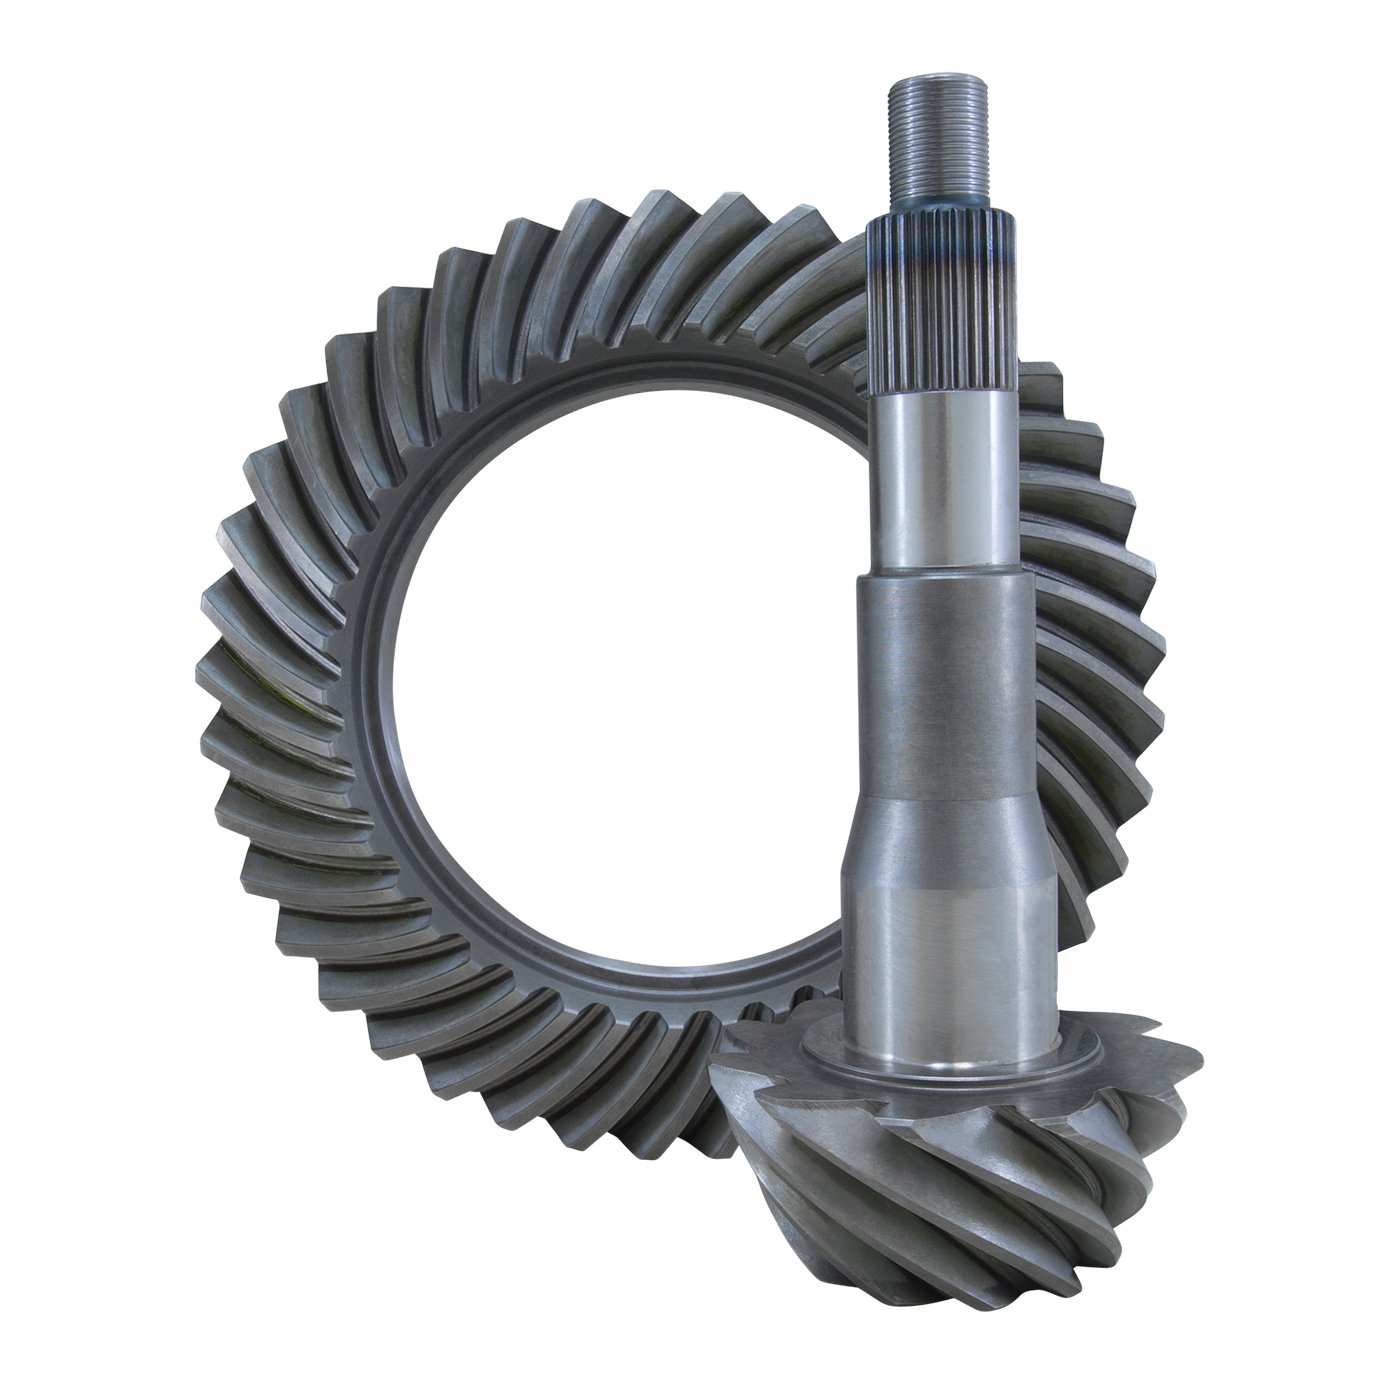 USA Standard 36106 Ring & Pinion Gear Set, For Ford 10.25 in., 4.11 Ratio